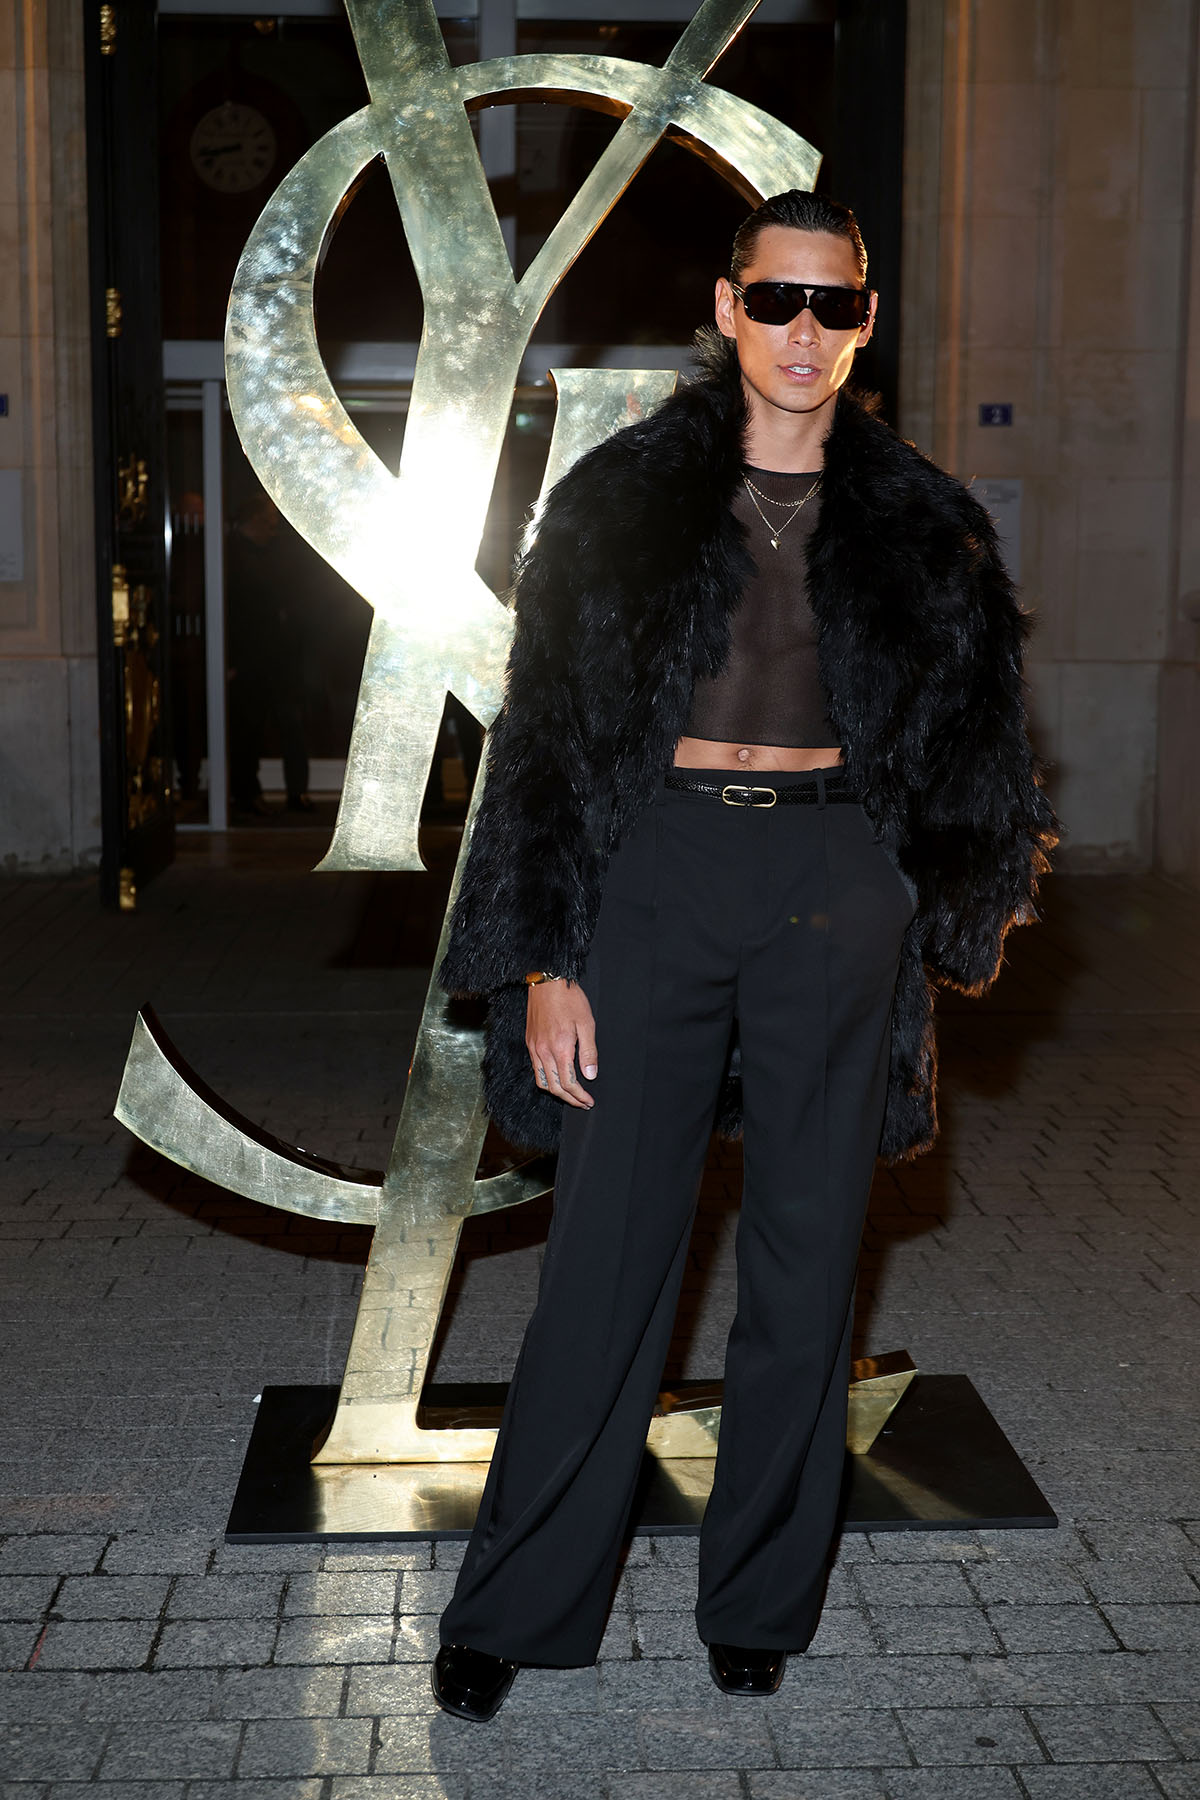 Celebrities, guests marvel at YSL fashion mansion in Paris